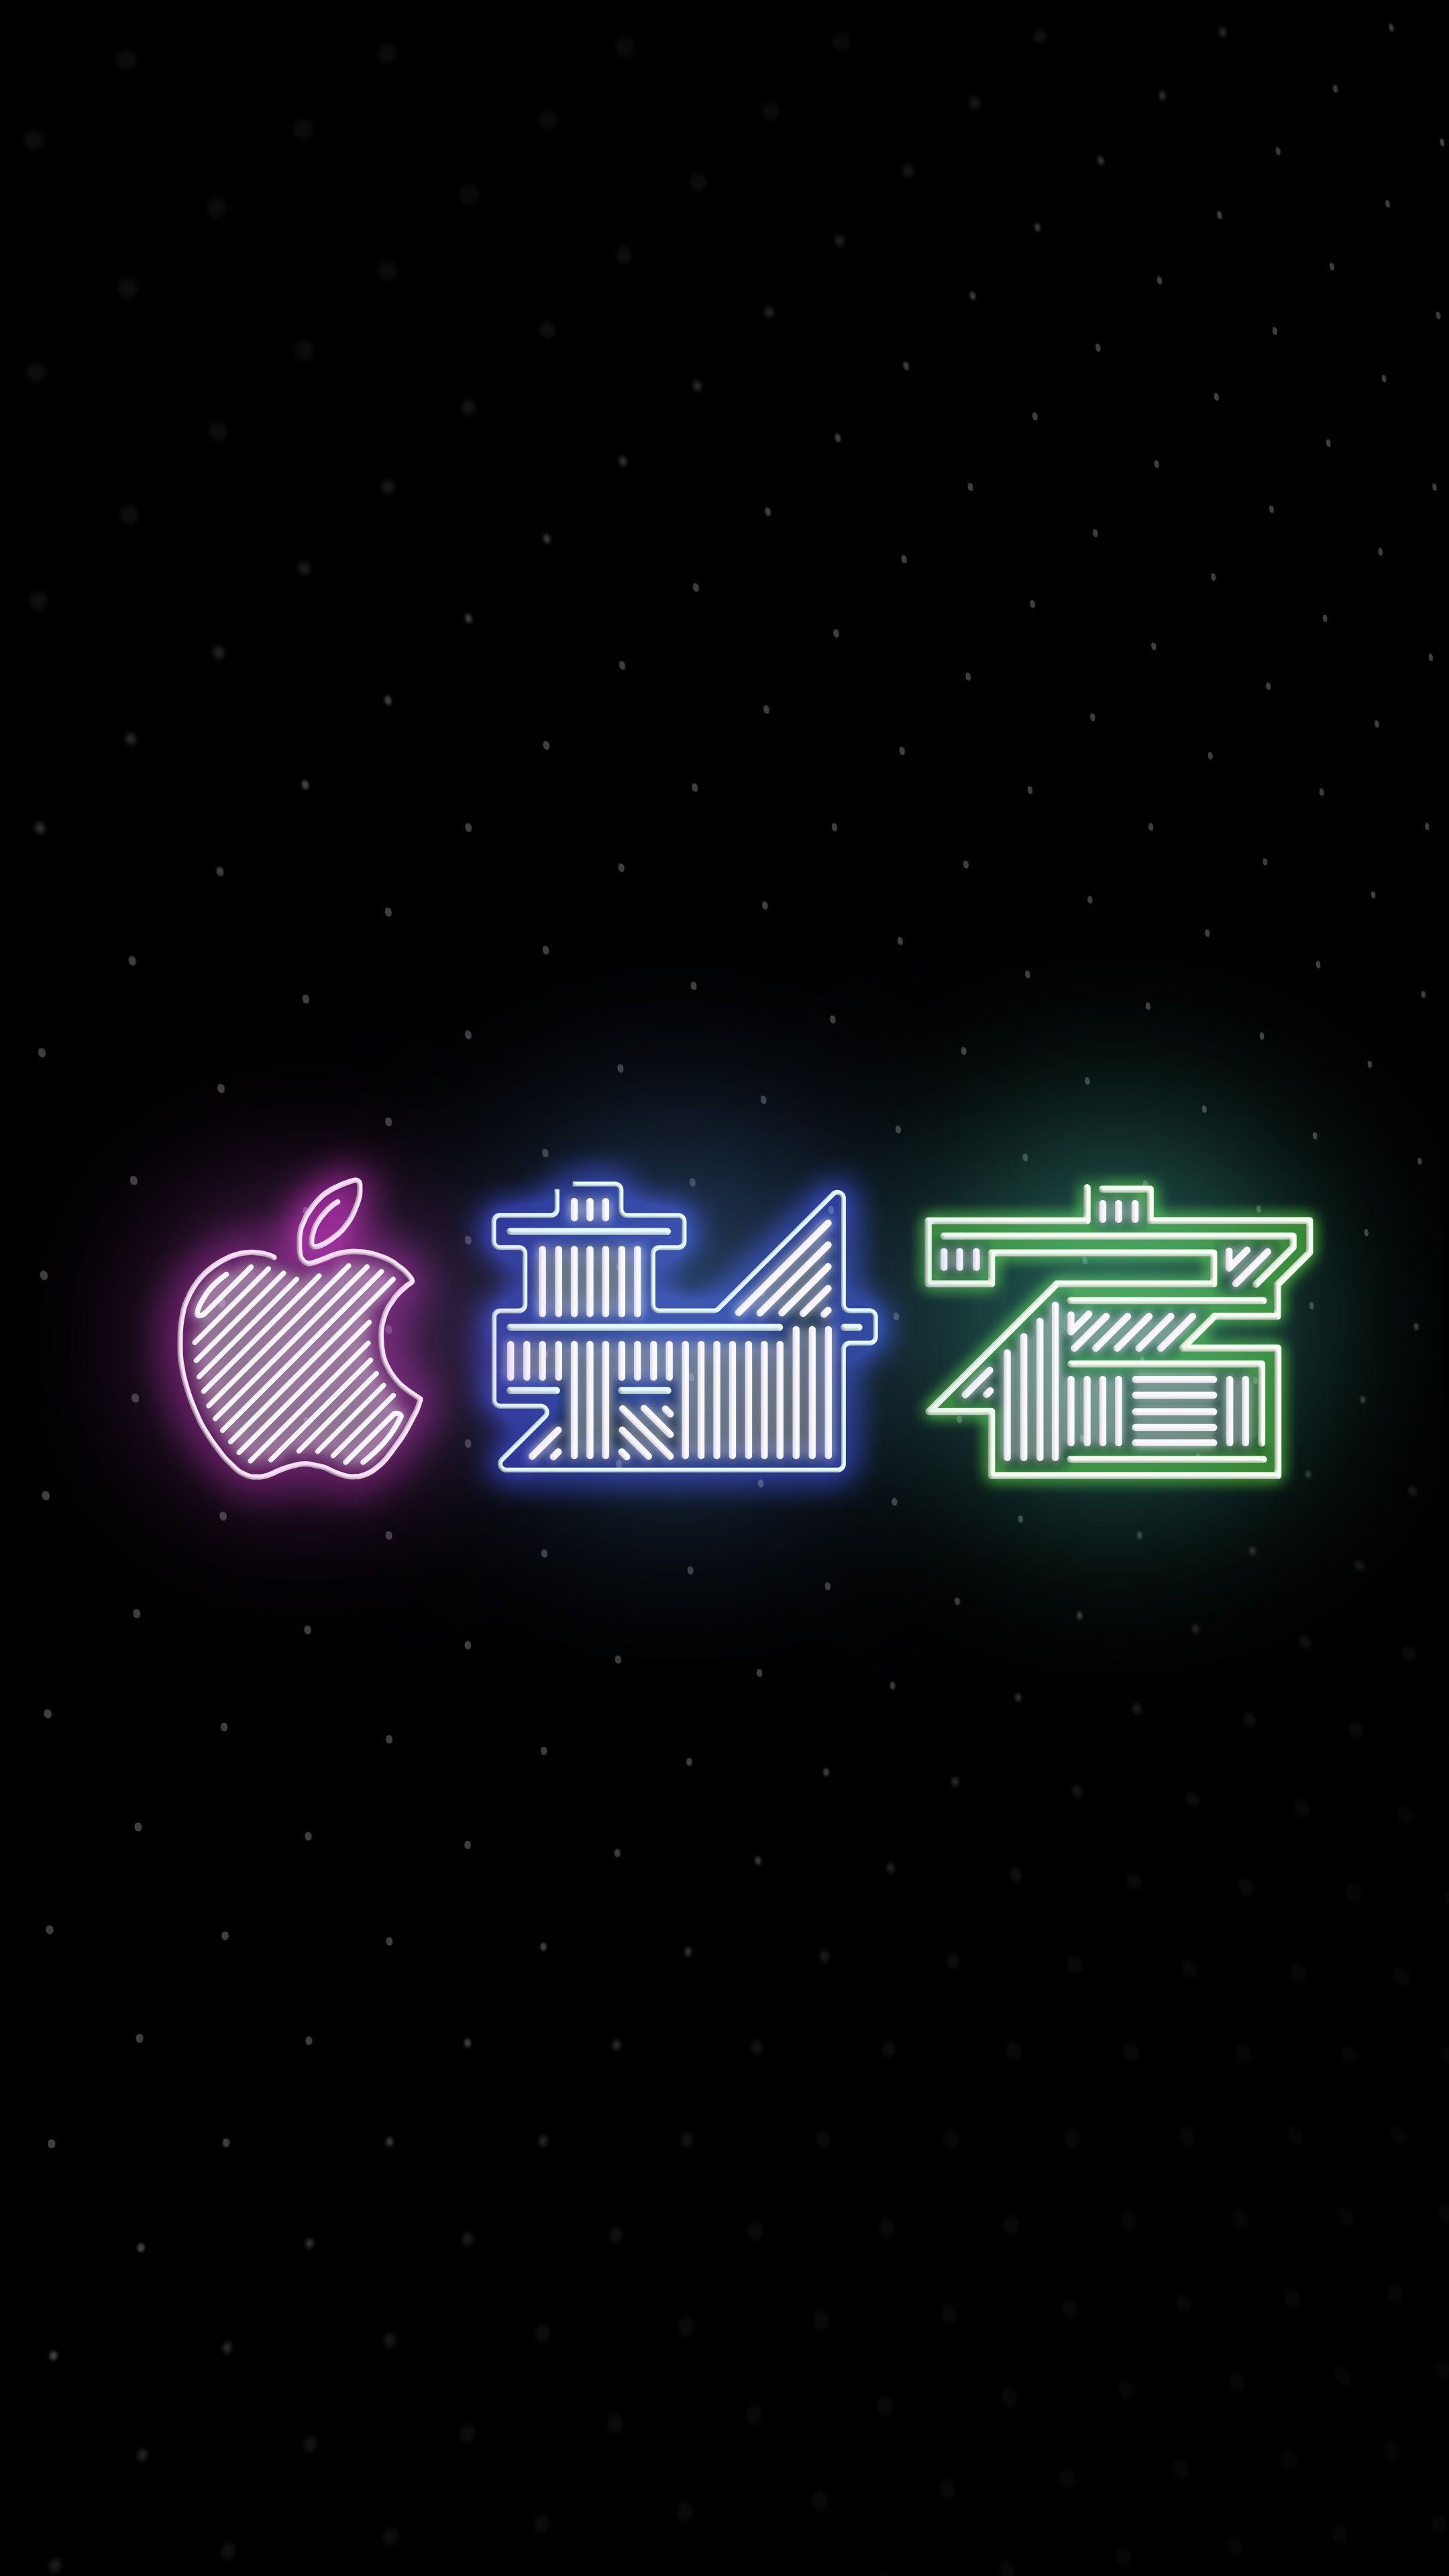 Tokyo Apple Store Inspired Wallpaper For IPhone, IPad, And Desktop